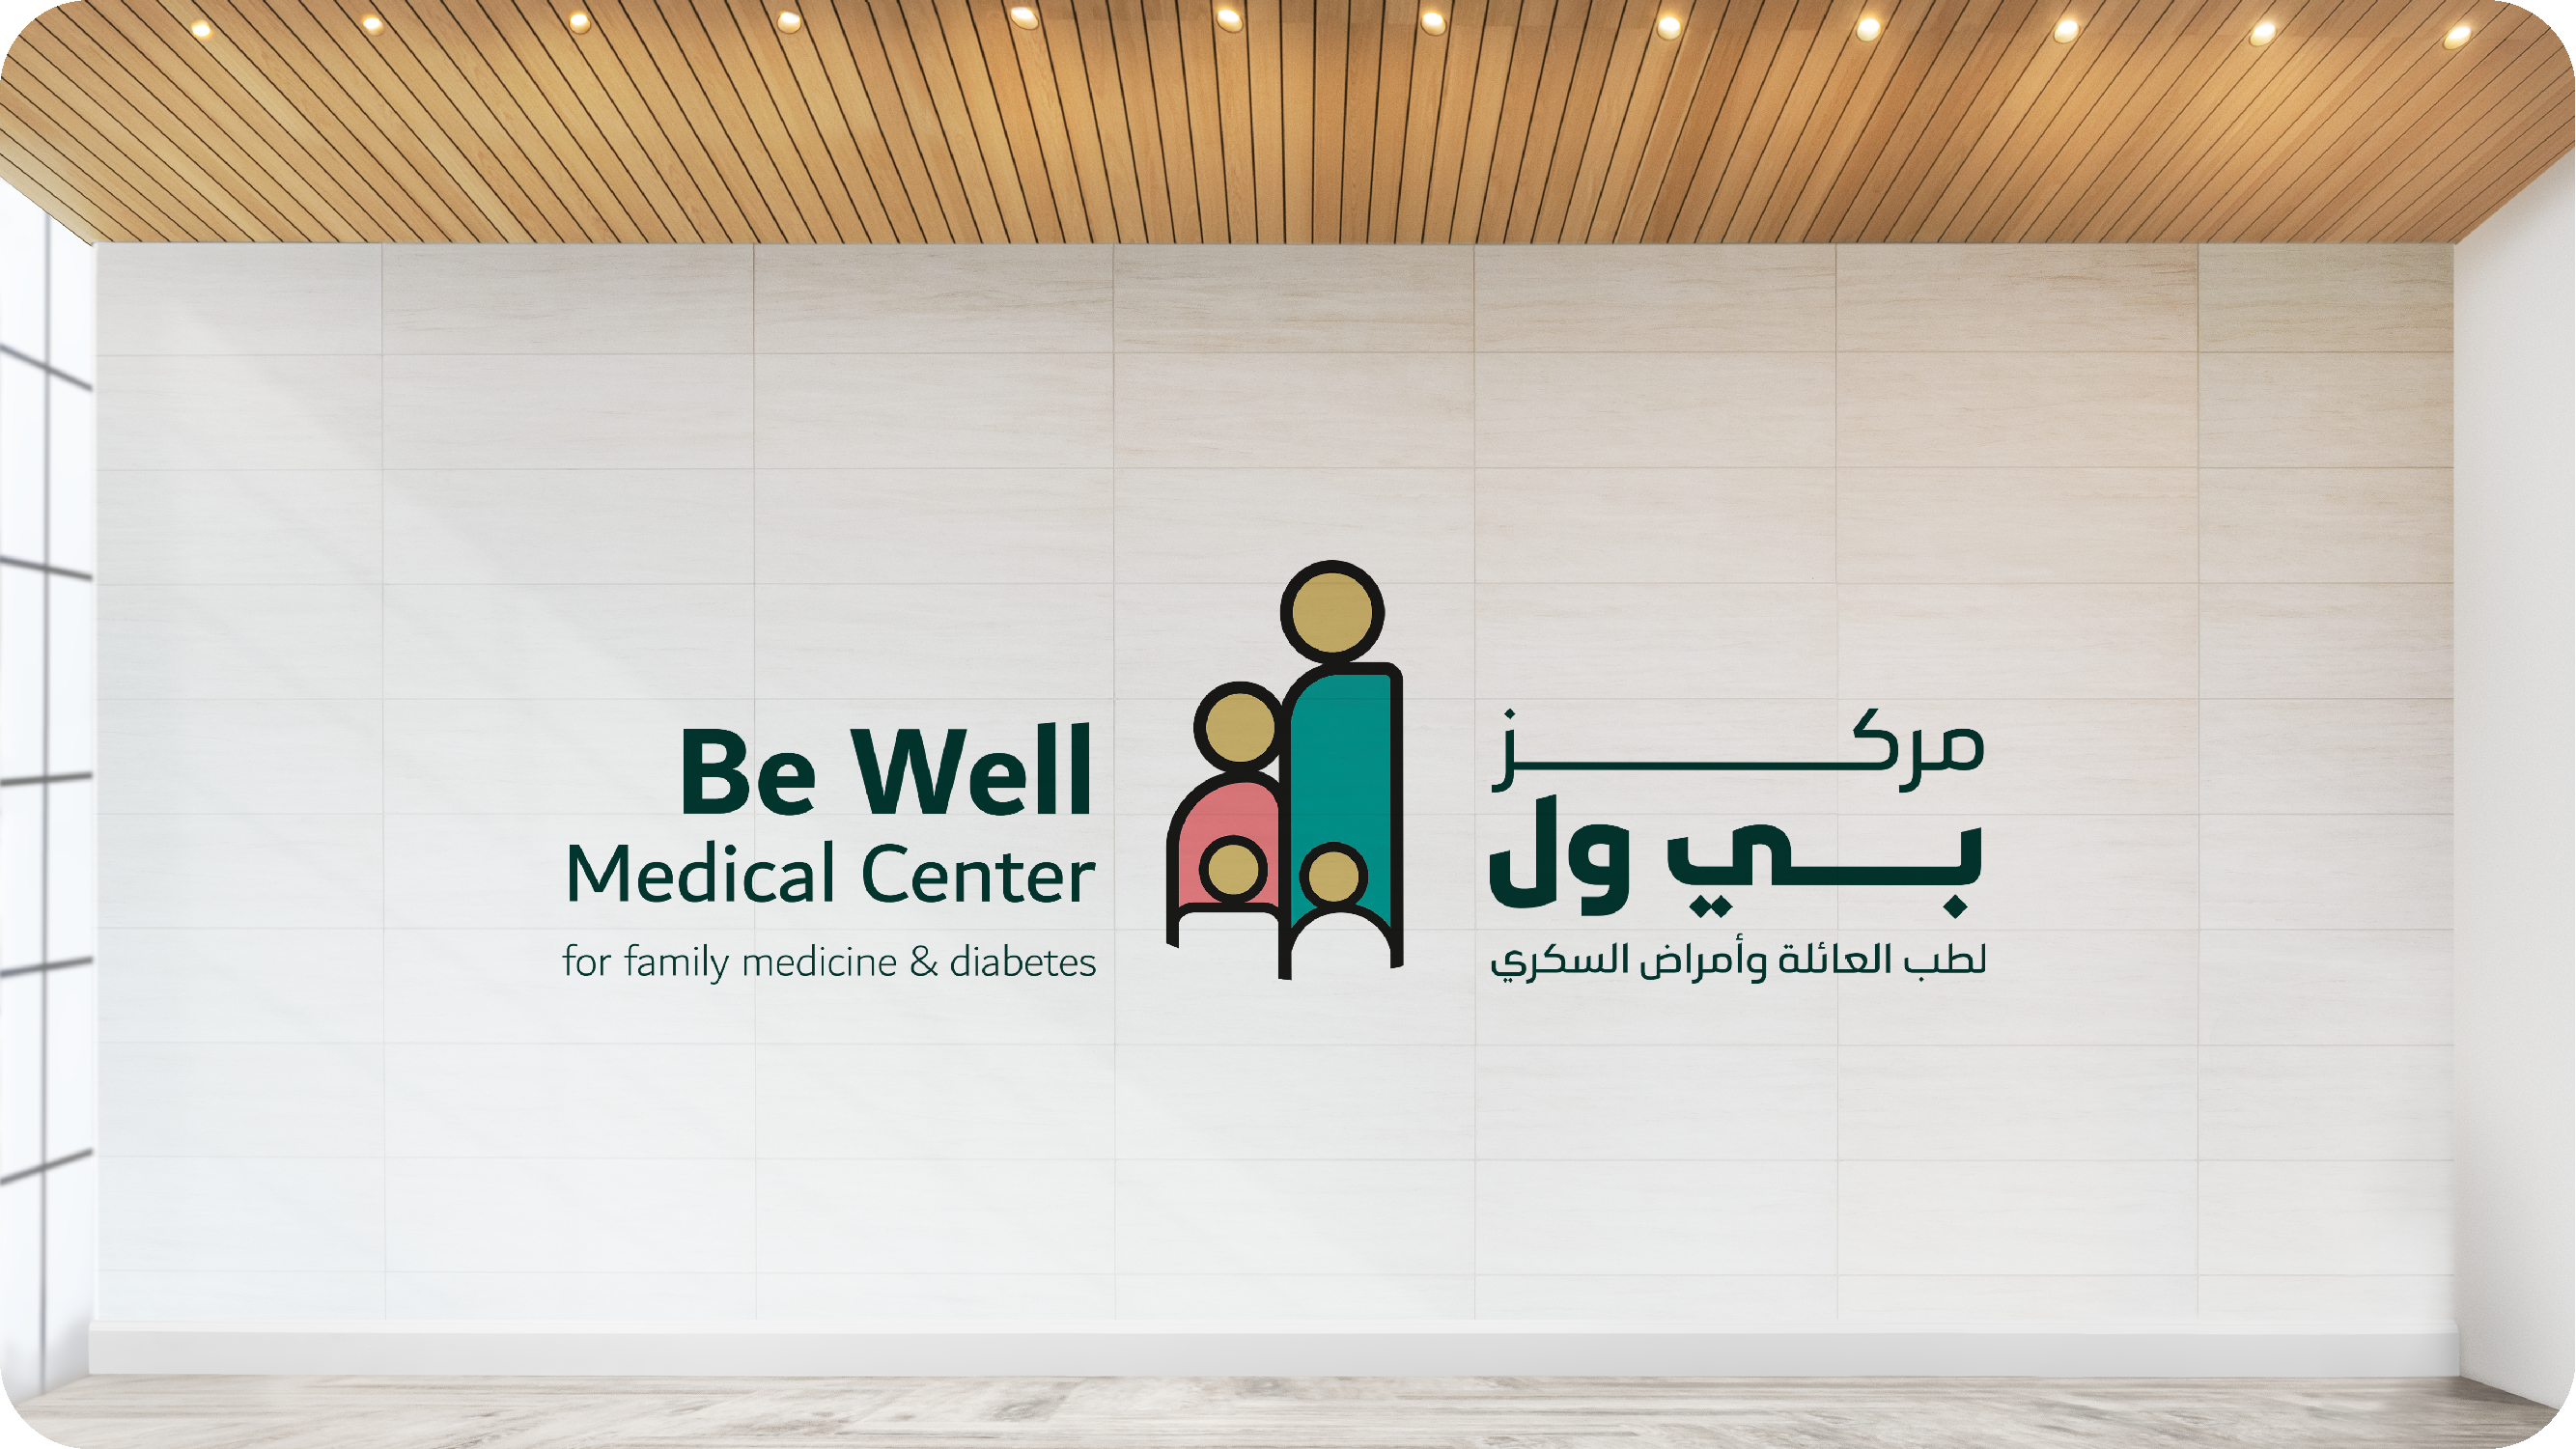 BE WELL LOGO ON WALL